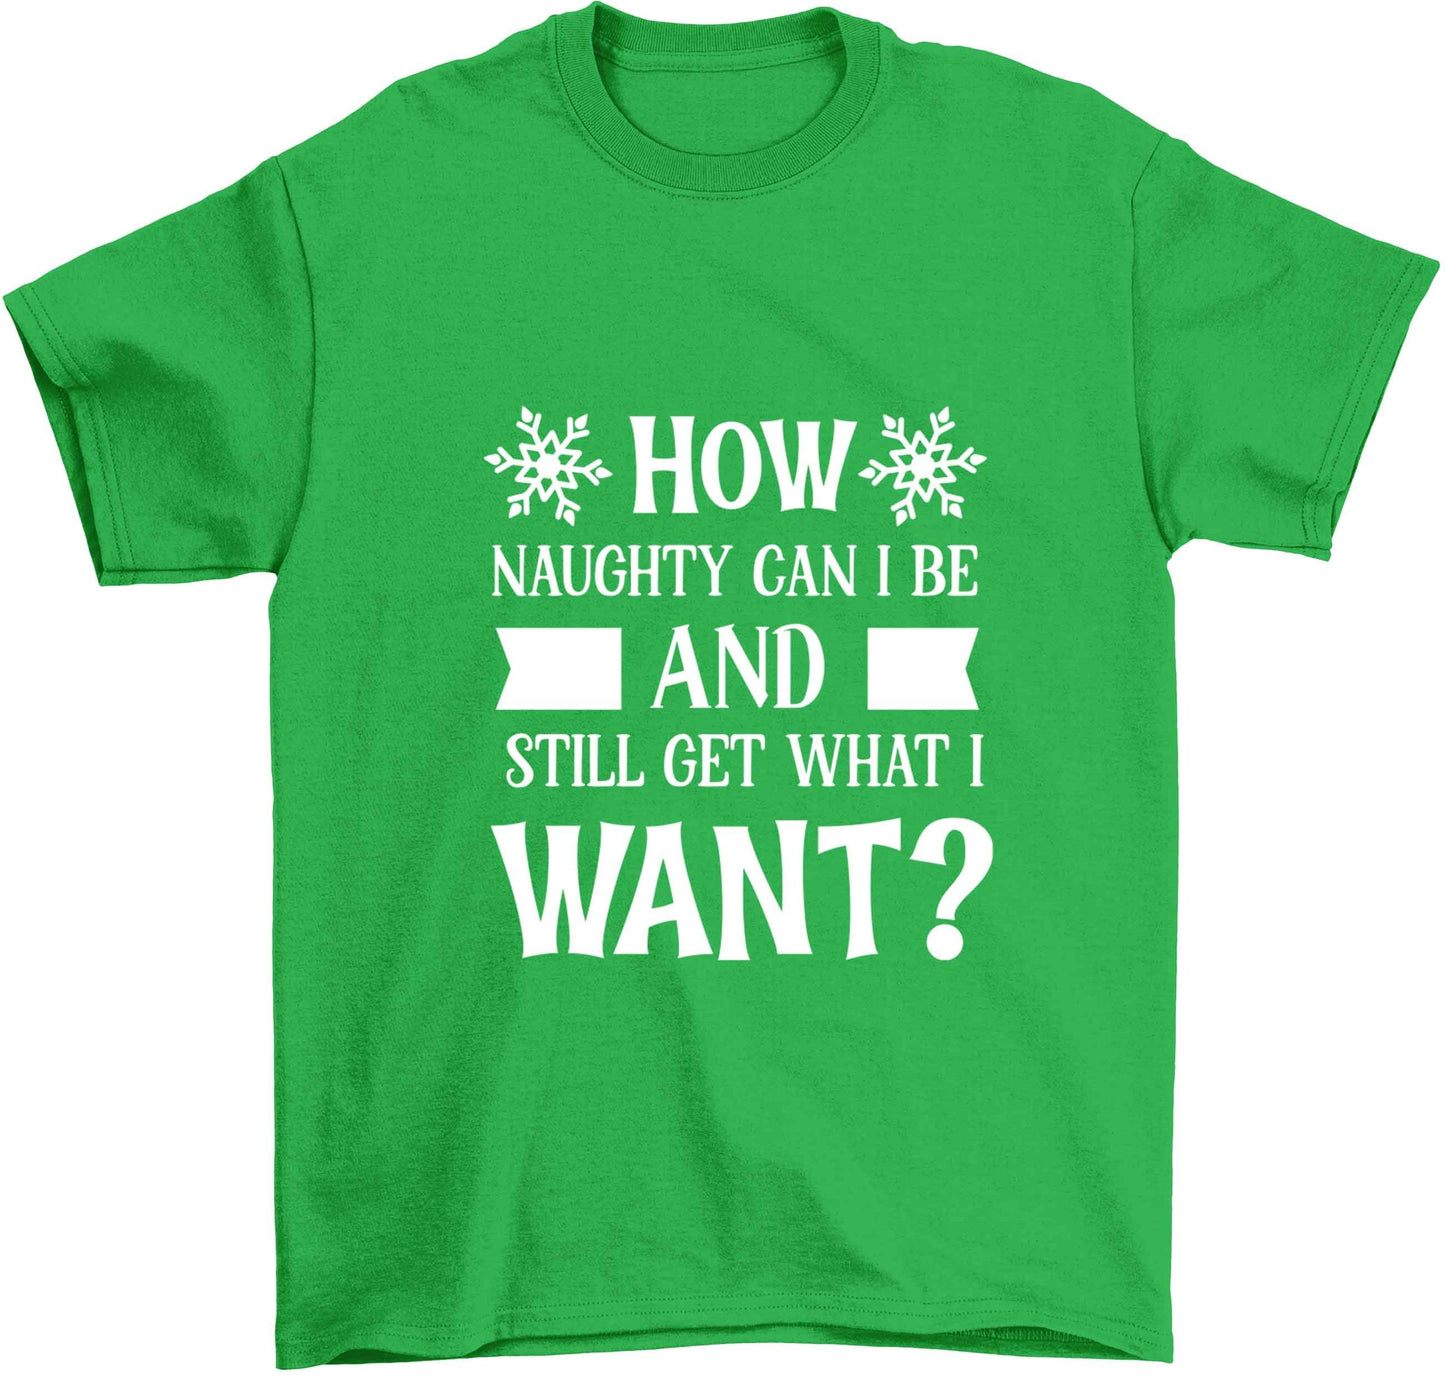 How naughty can I be and still get what I want? Children's green Tshirt 12-13 Years